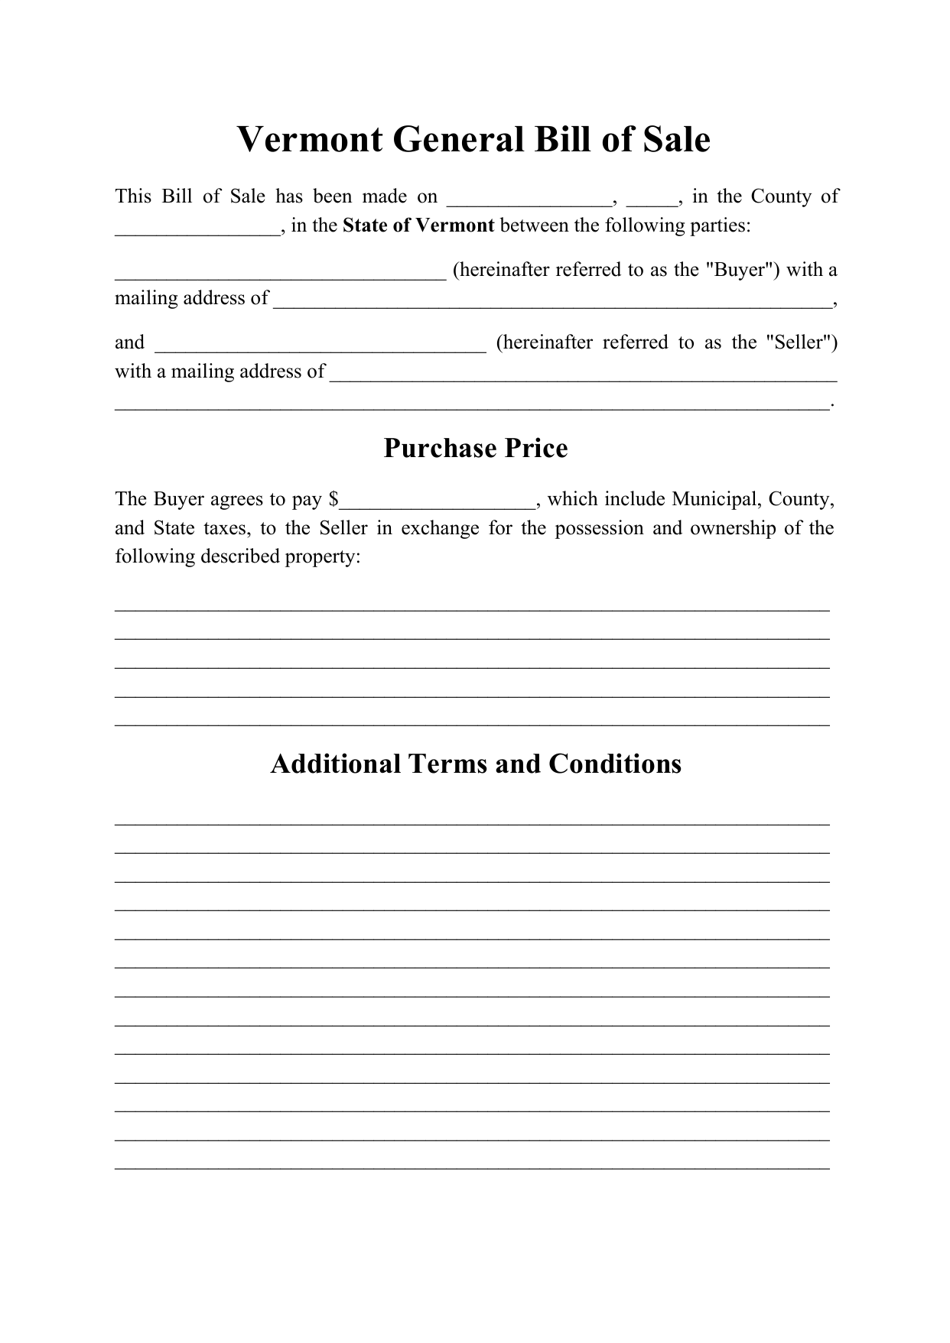 Vermont Generic Bill of Sale Form Download Printable PDF Templateroller